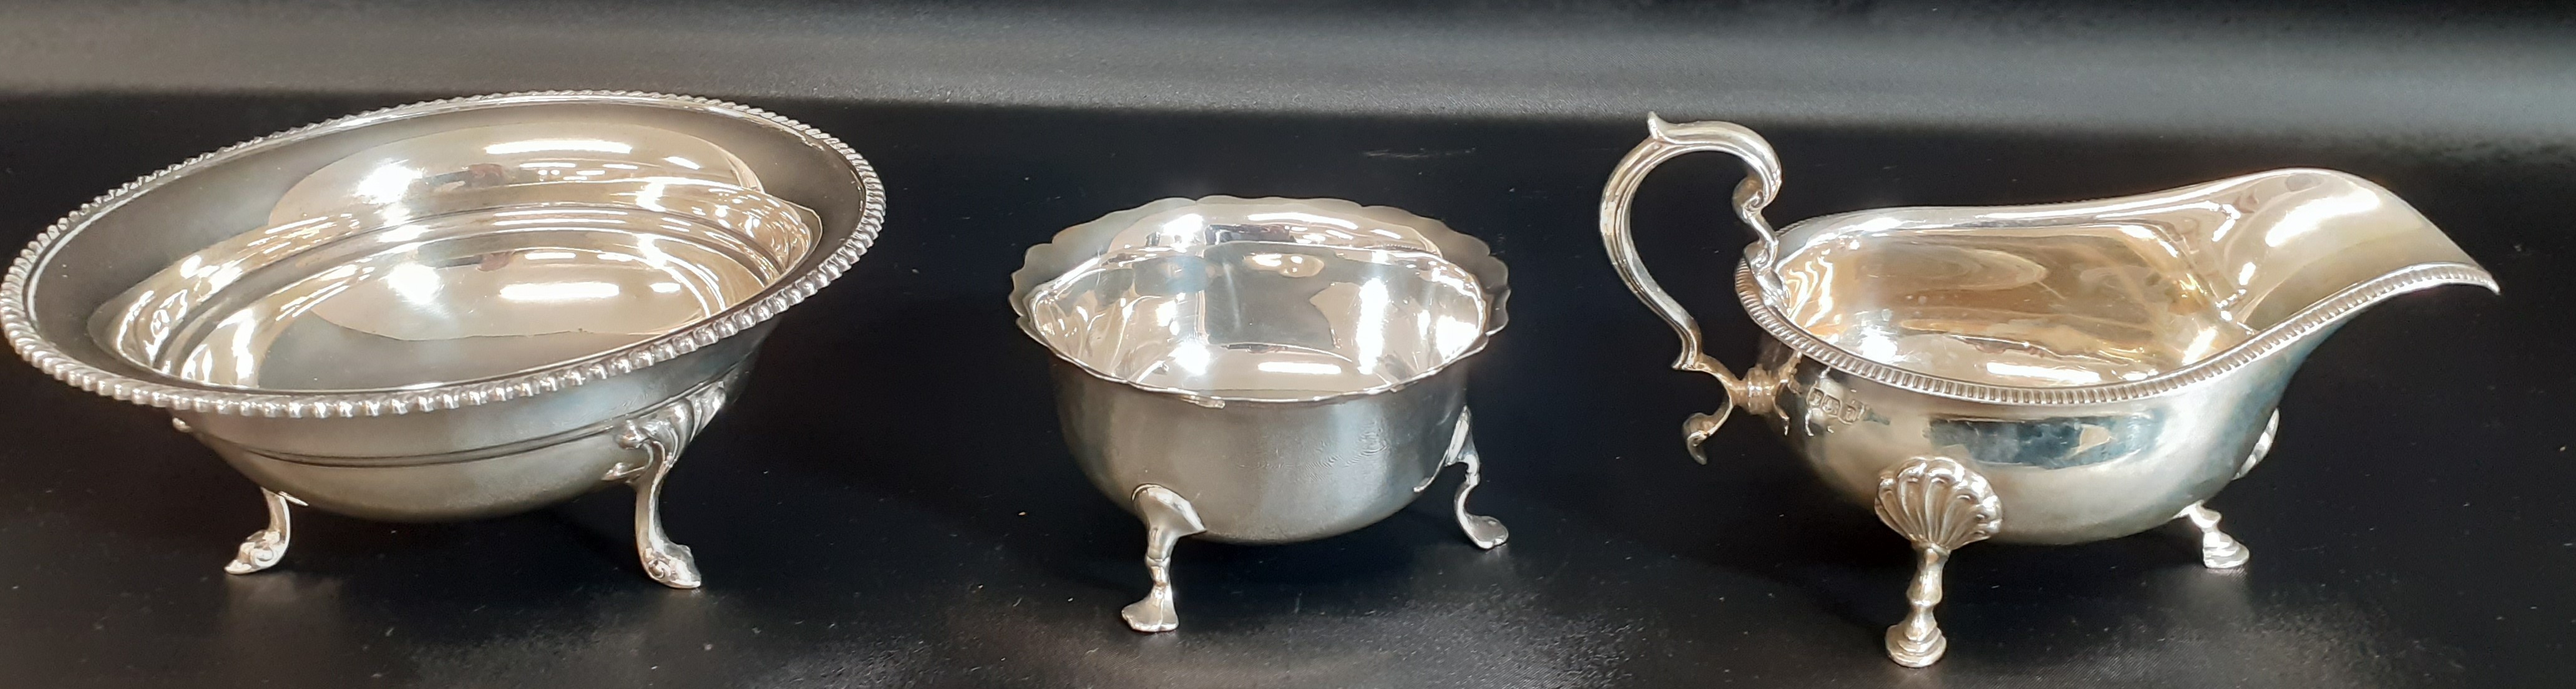 Edwardian silver sauce boat Mappin & Webb Sheffield 1901, silver bowl with gadrooned rim on three